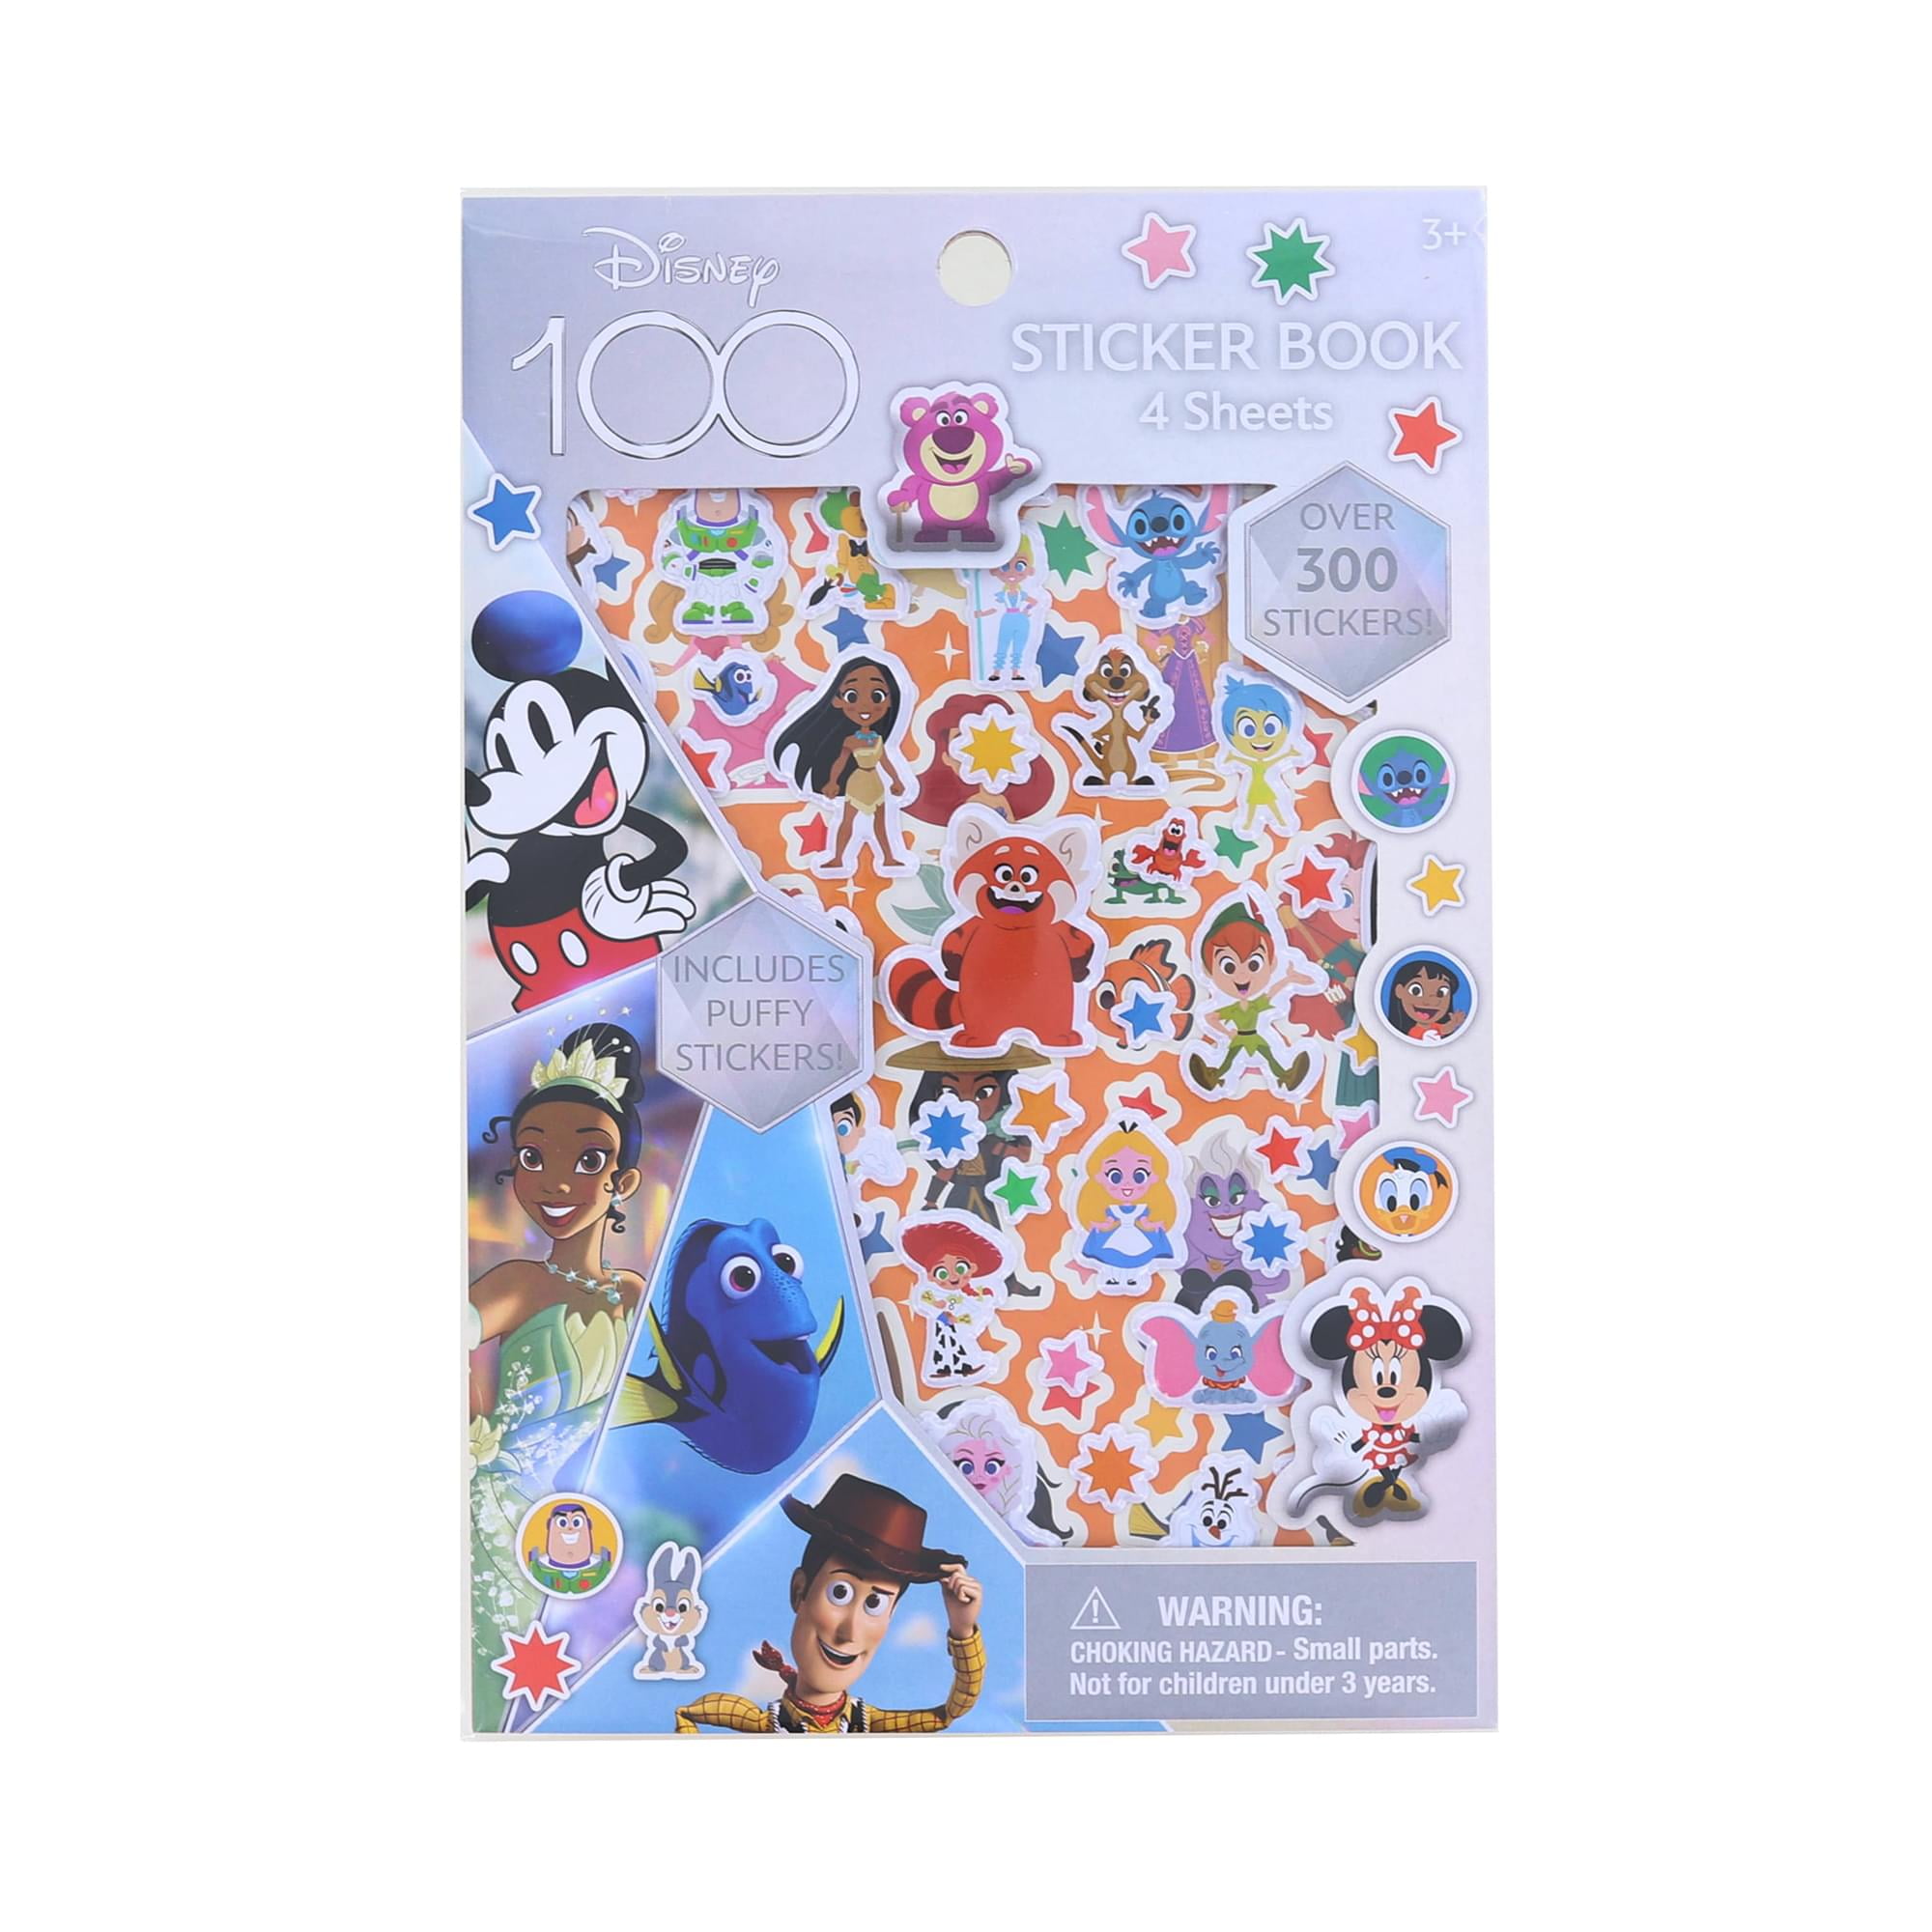 Start collecting with the Crystal Art Disney 100 Album & Sticker